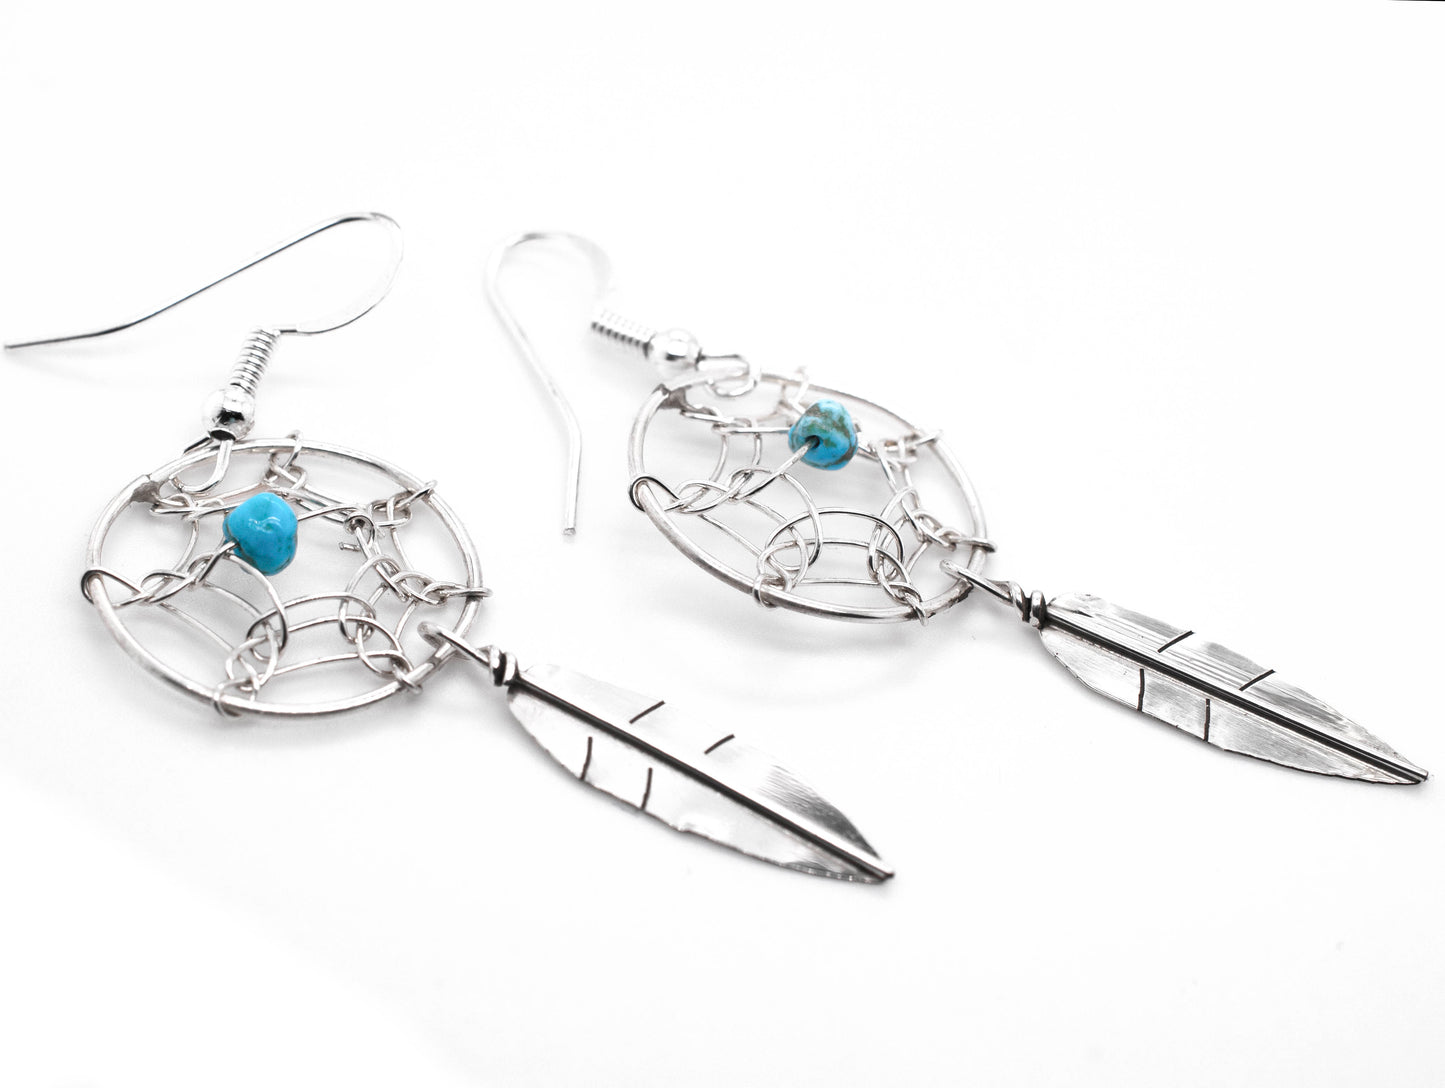 A pair of Zuni Dreamcatcher earrings with natural stone bead adorned with vibrant turquoise stones from Super Silver.